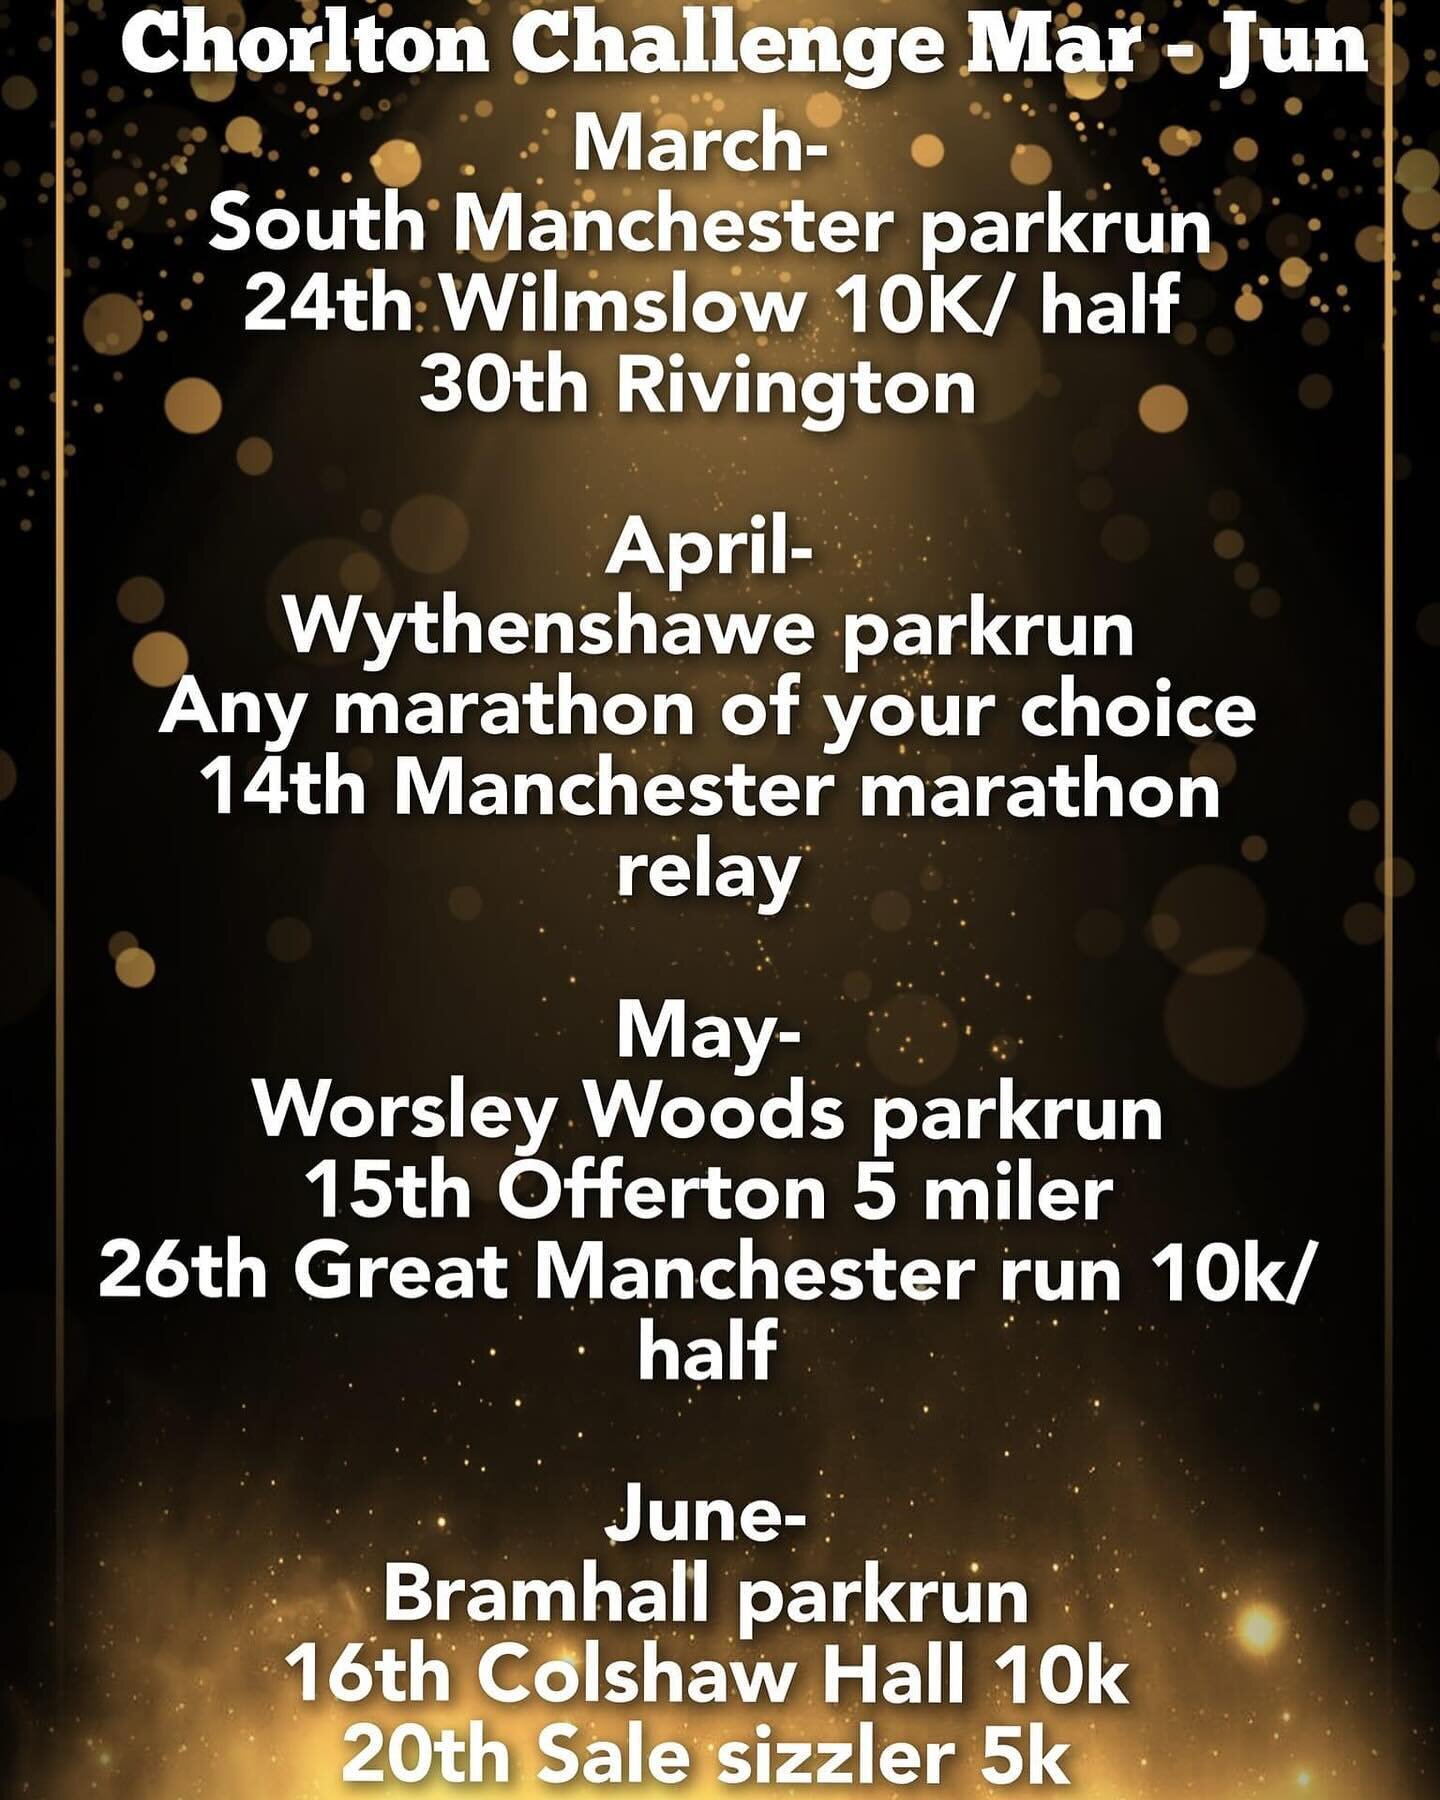 🖤Final Chorlton Challenge Races💛
Below details the final Chorlton Challenge races for the championship up to June! It&rsquo;s been great to see so many CRs at events and we hope you can join us in the Spring 🐣 events will be added to the FB page t